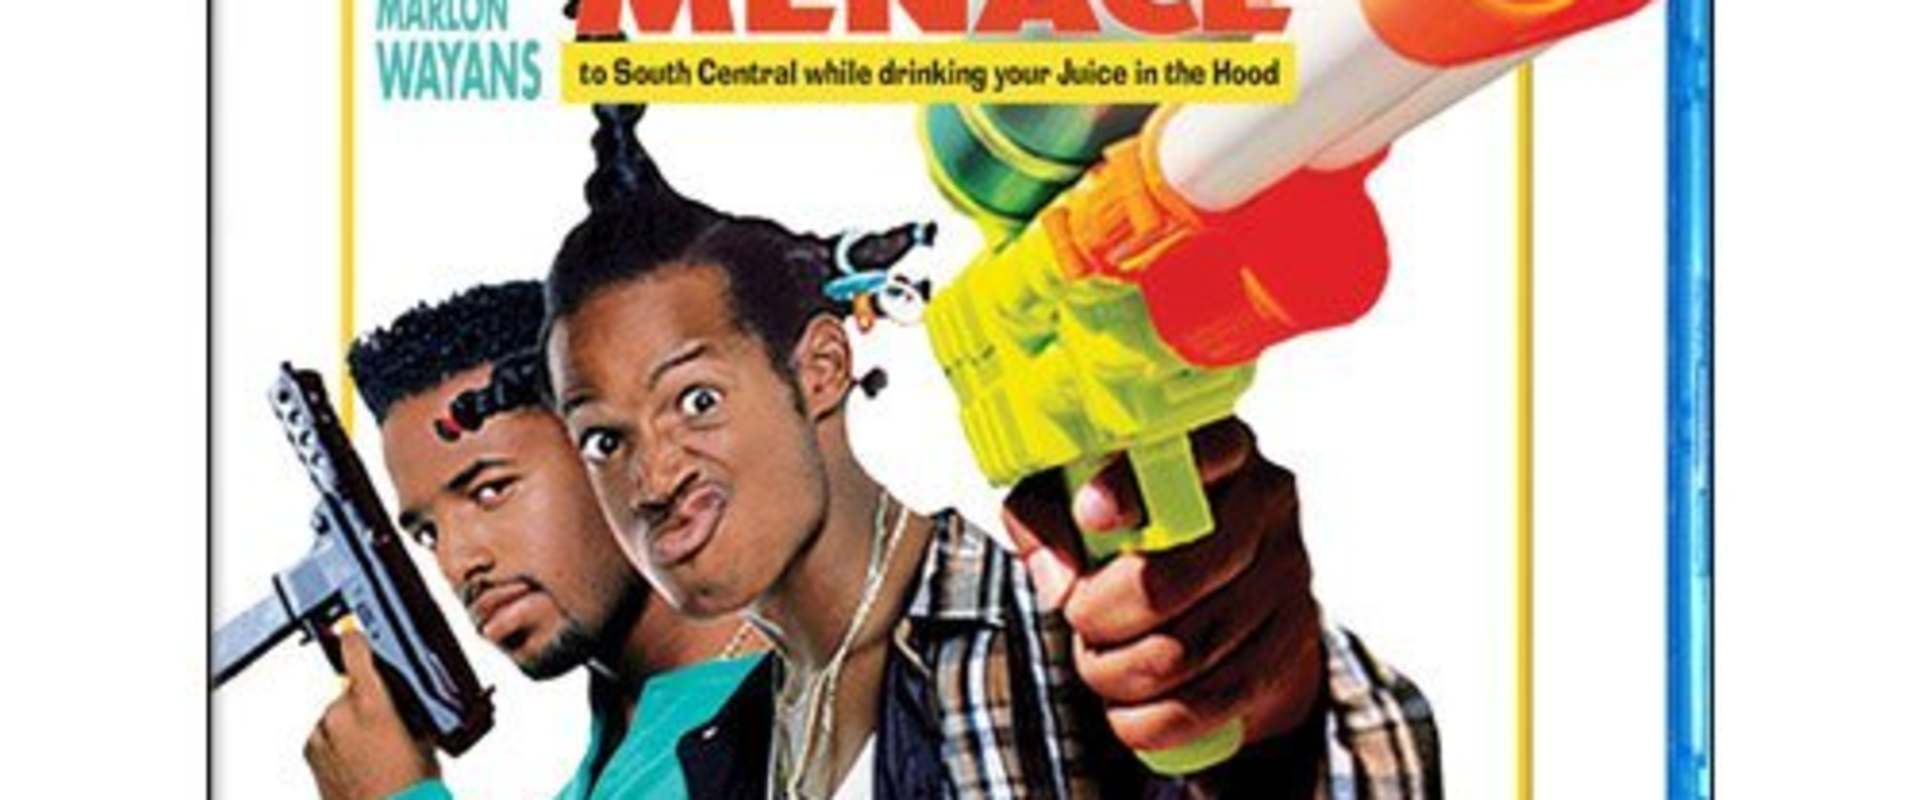 Don't Be a Menace to South Central While Drinking Your Juice in the Hood background 1